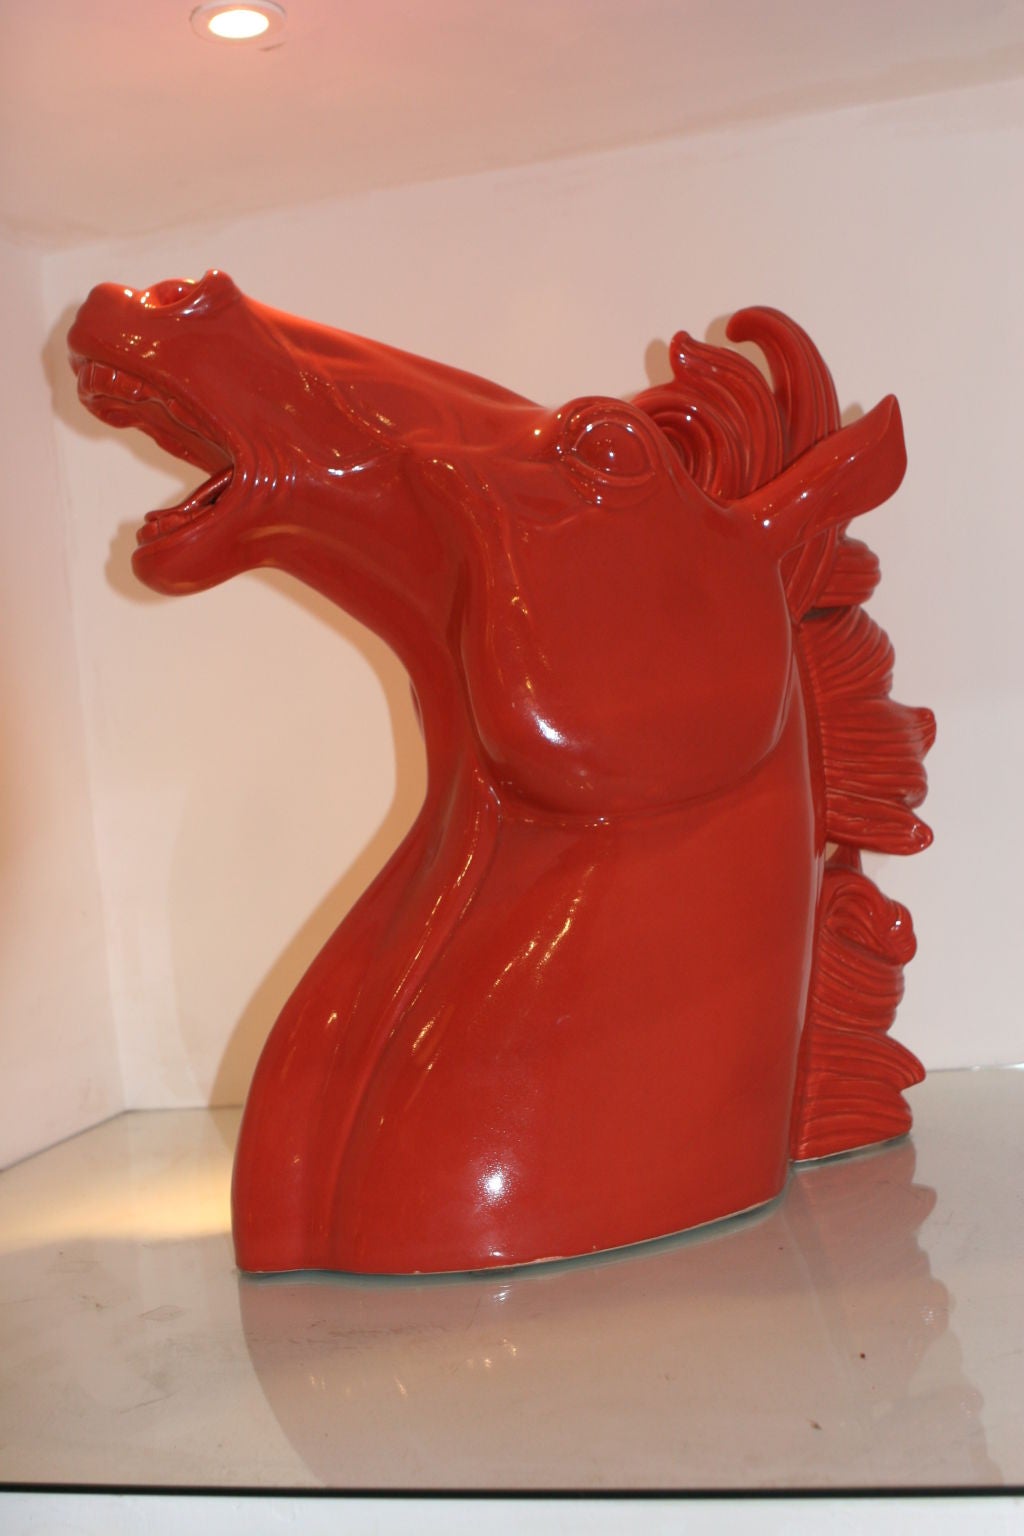 Yeehaw! This coral horse head is ready to go.  An eyepopper for any environment.